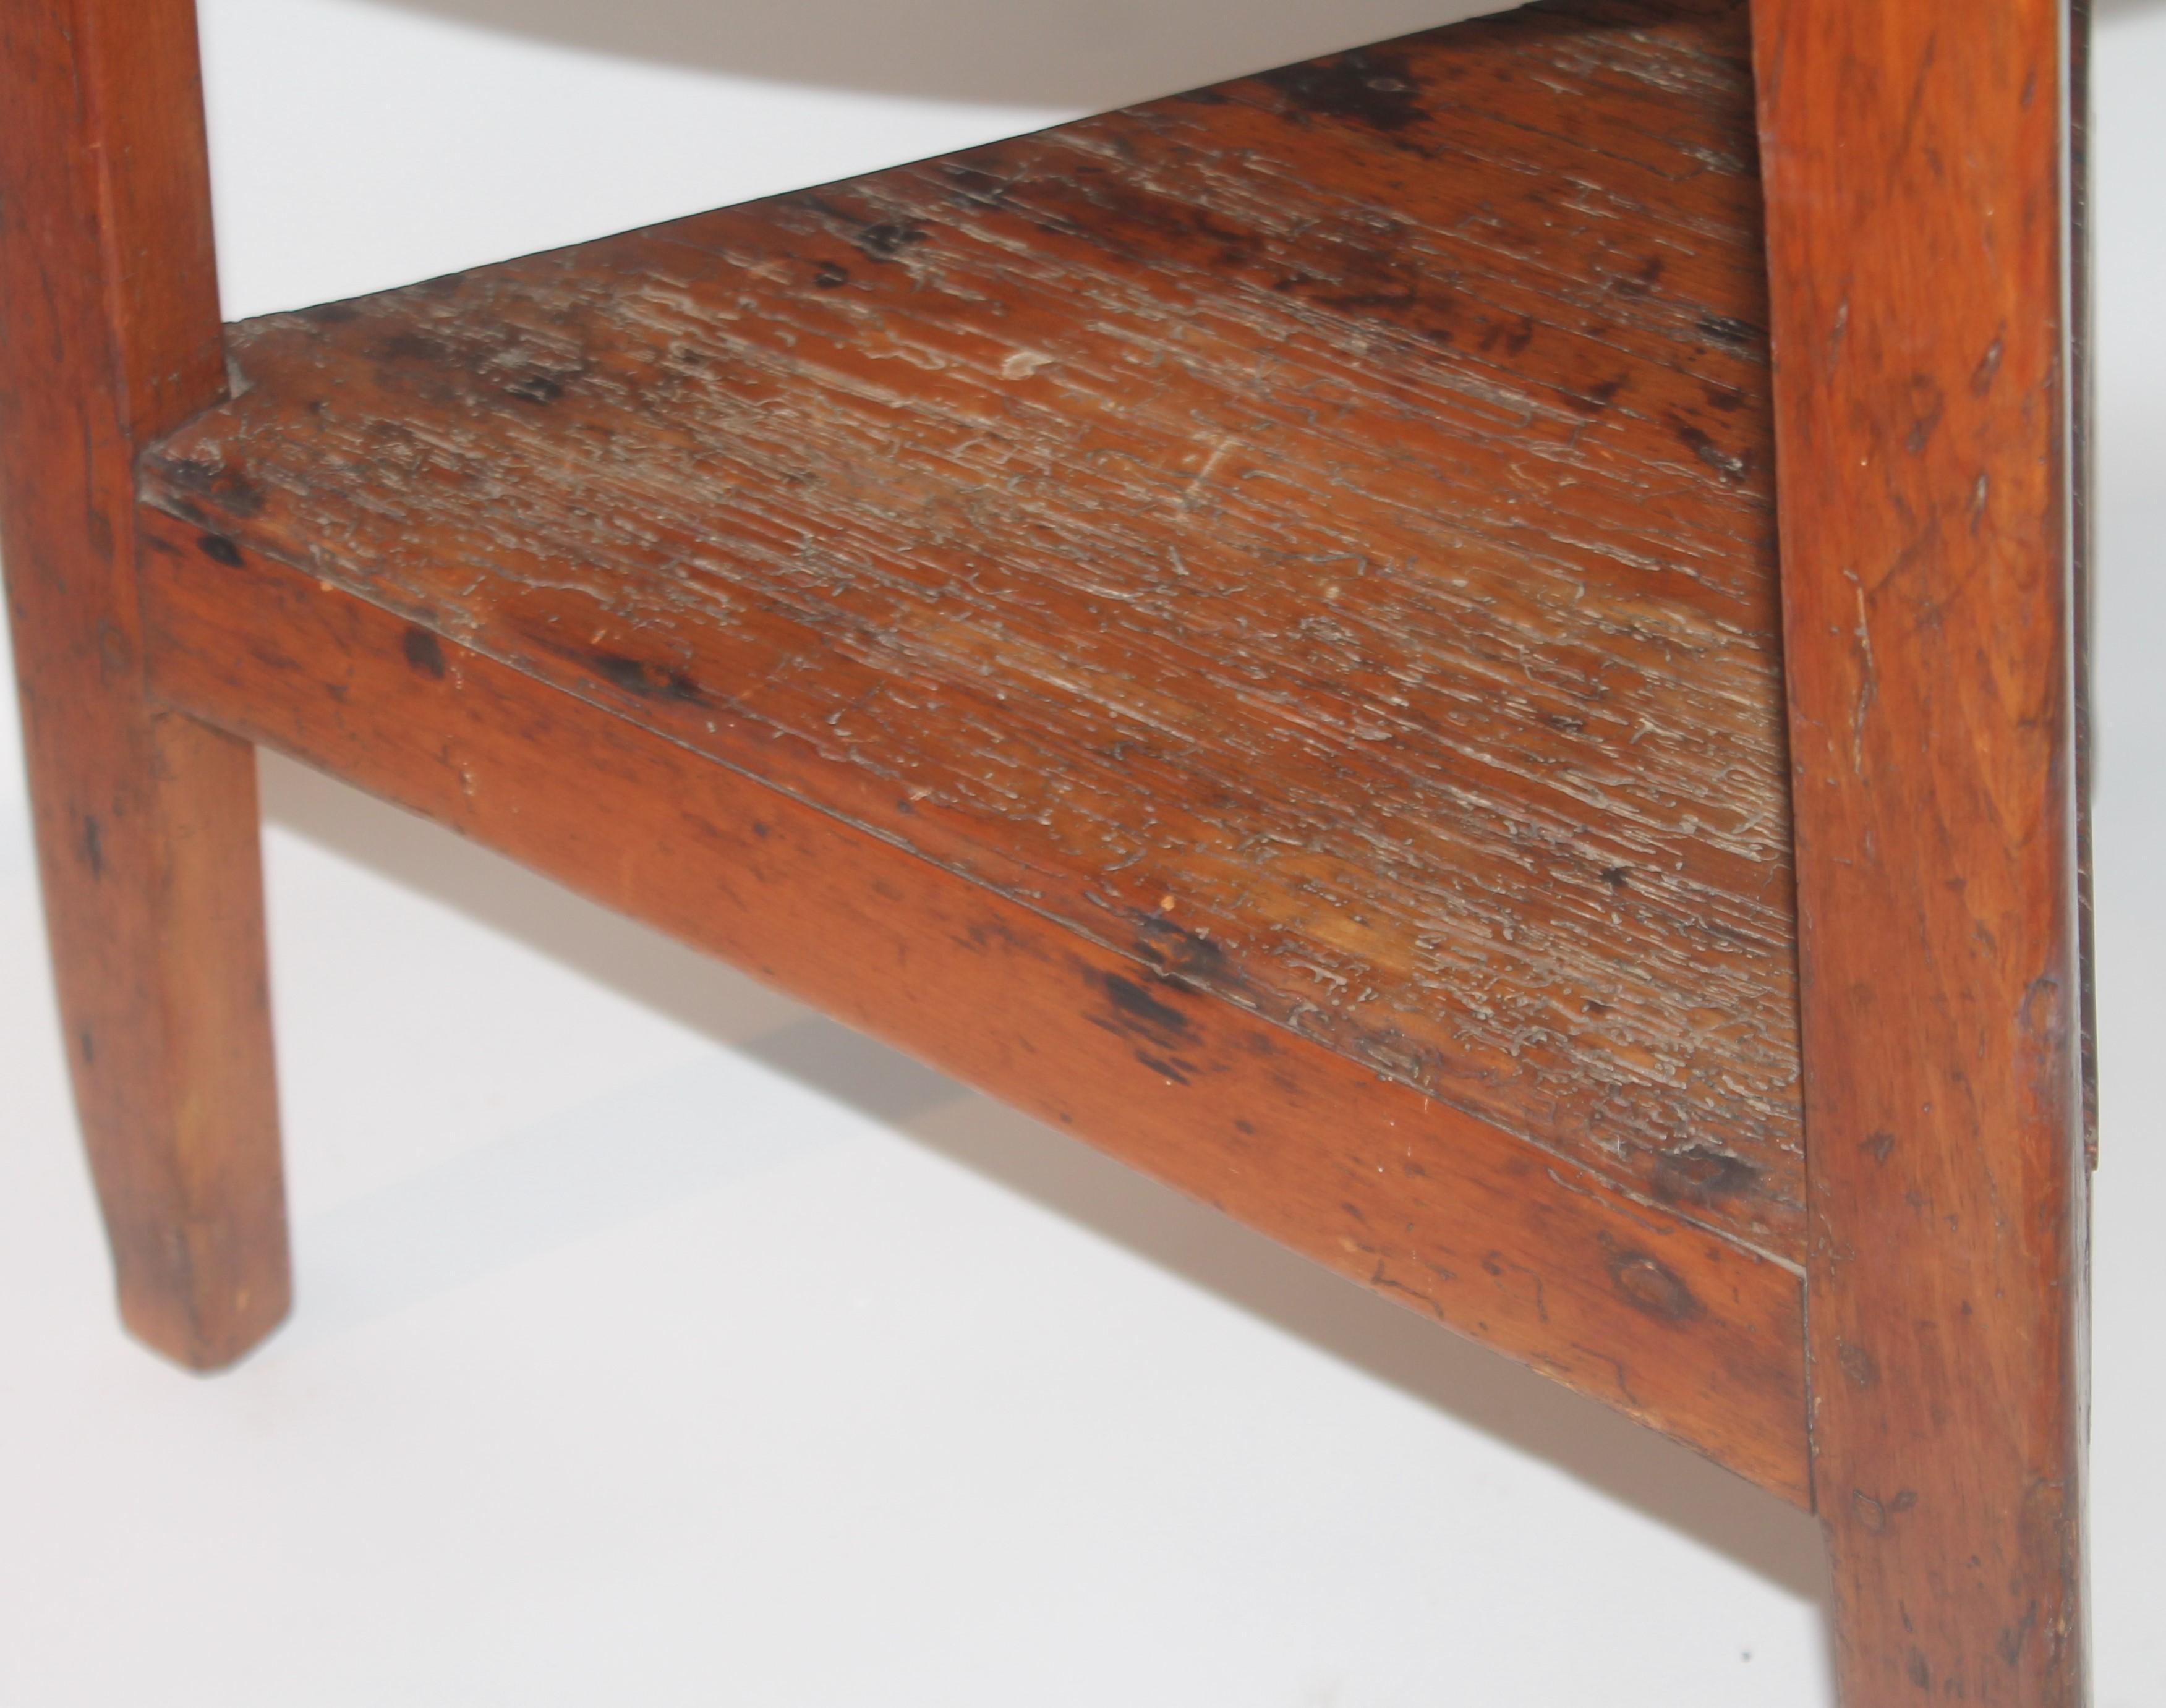 Hand-Crafted 18thc Cricket Table from New England